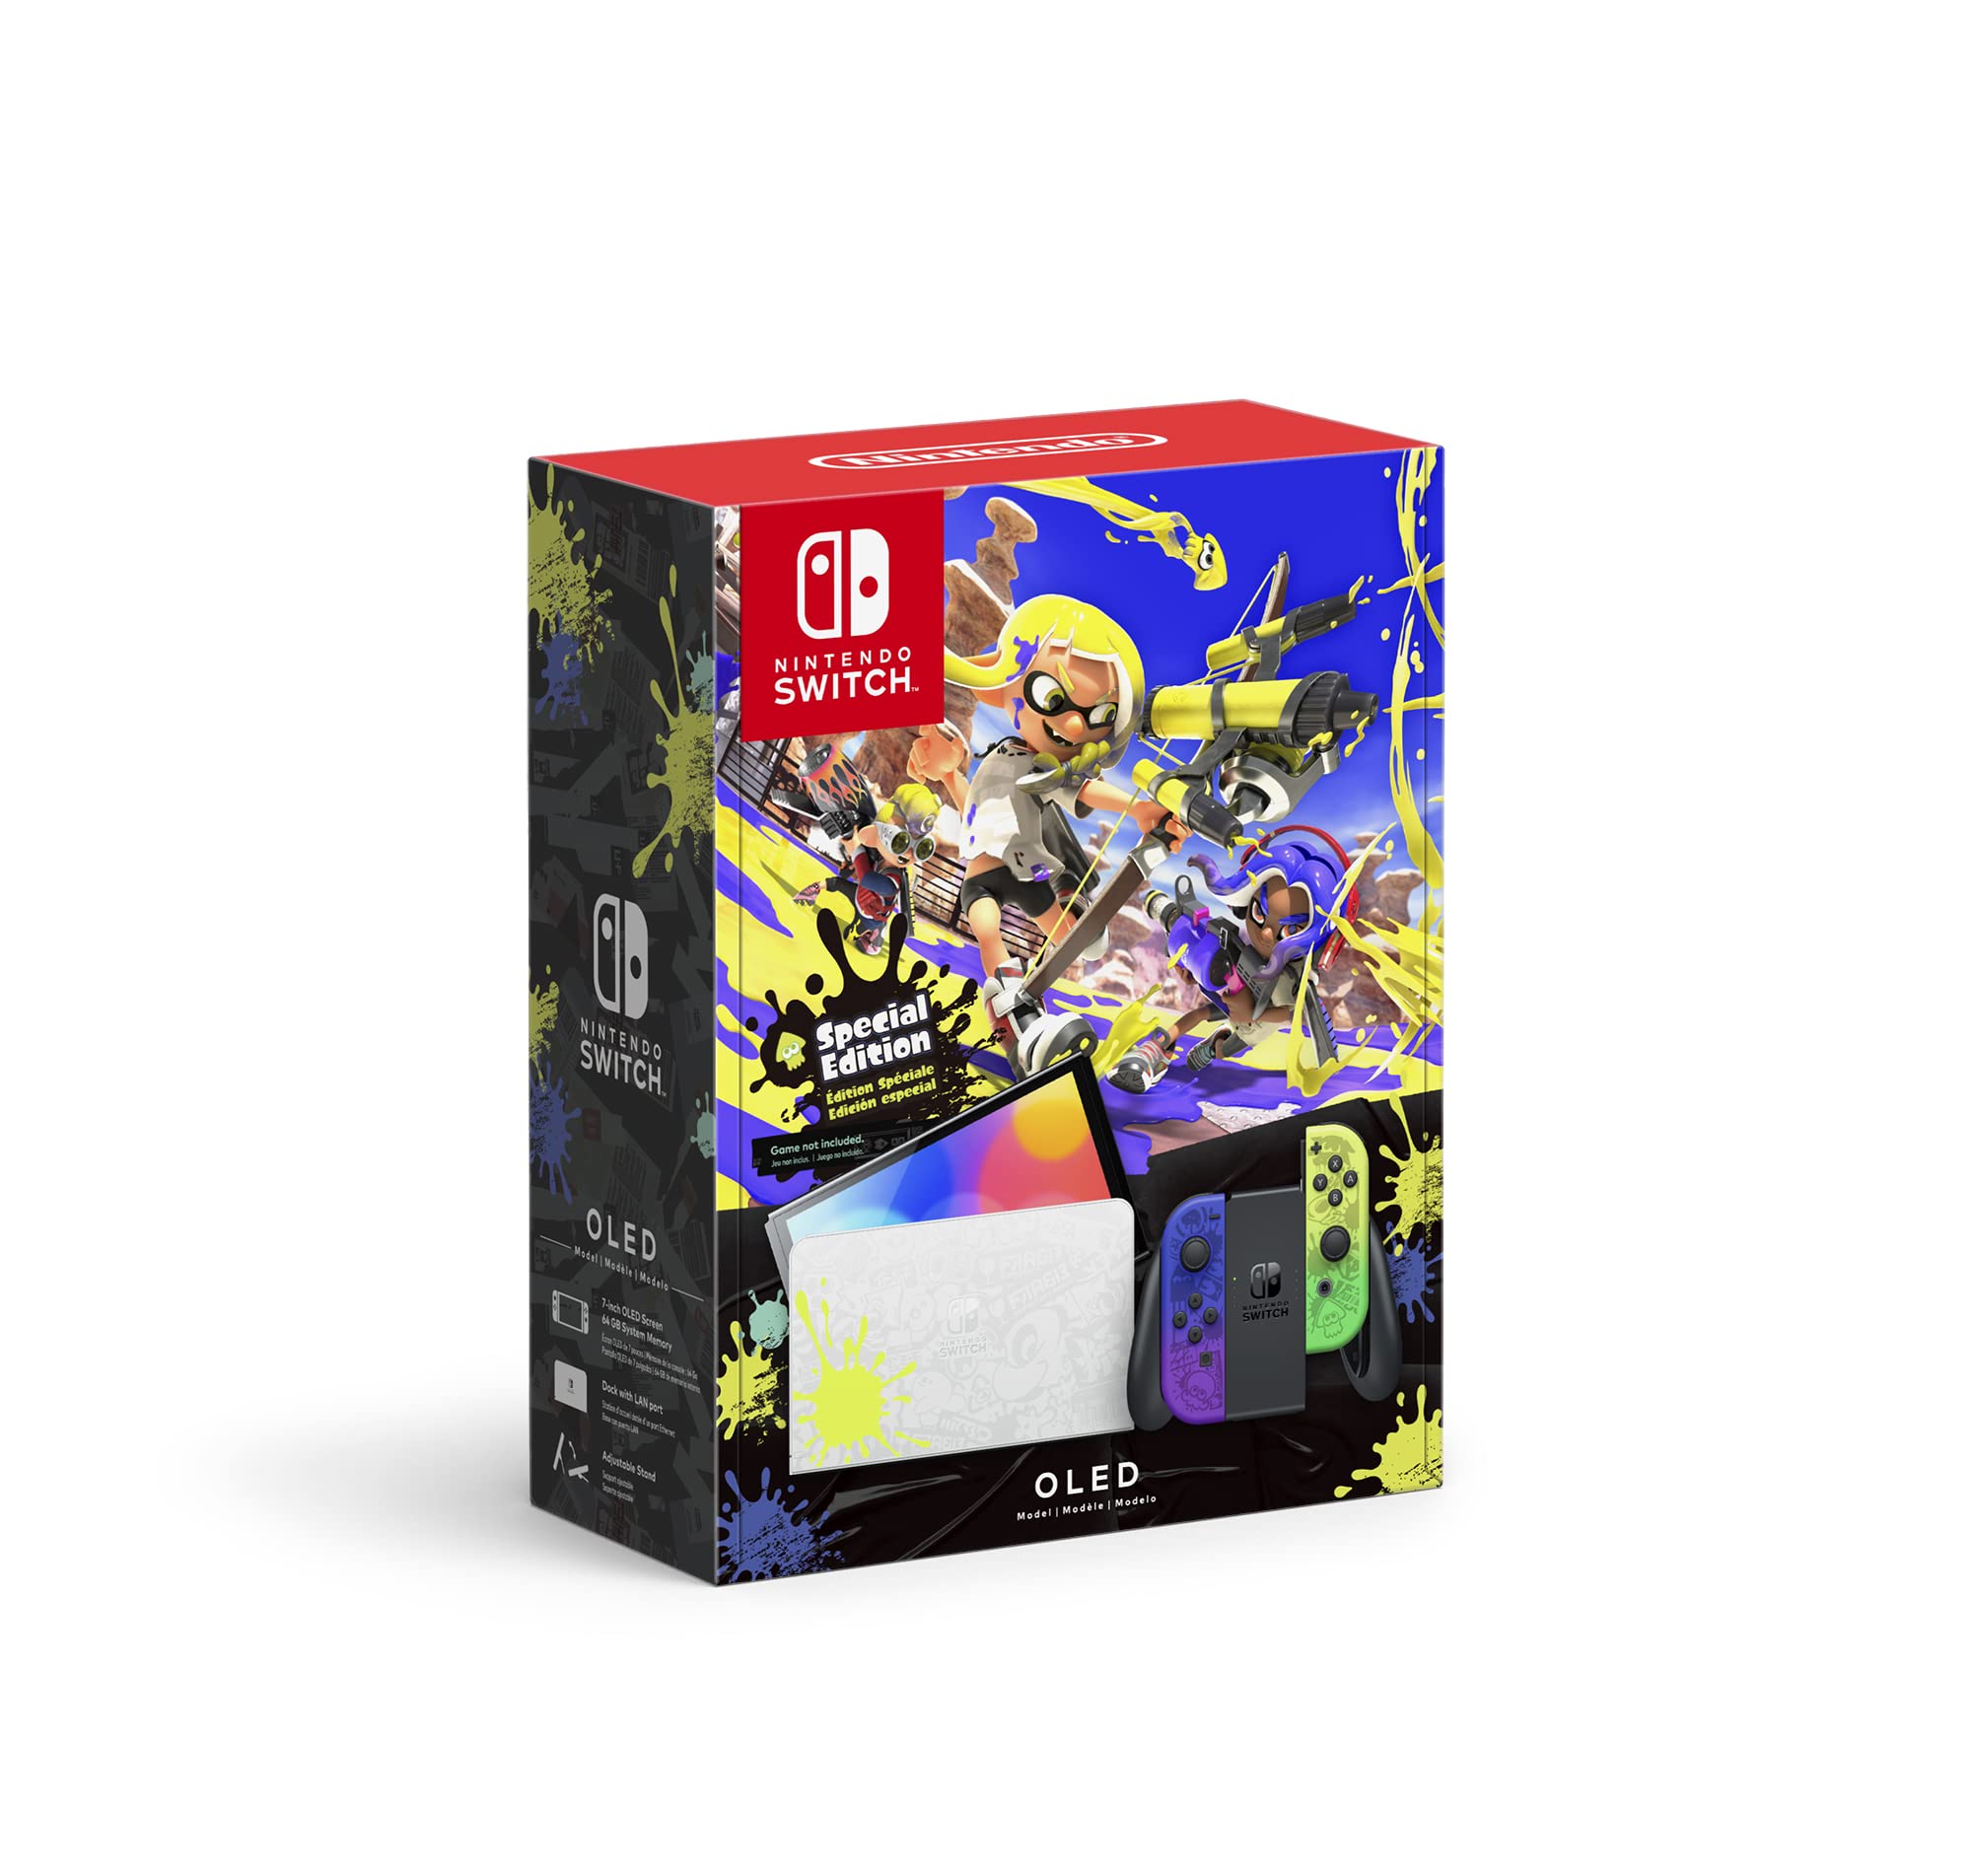 Nintendo Switch – OLED Model Splatoon 3 Special Edition : Video Games switch oled 喷射战士3限定版